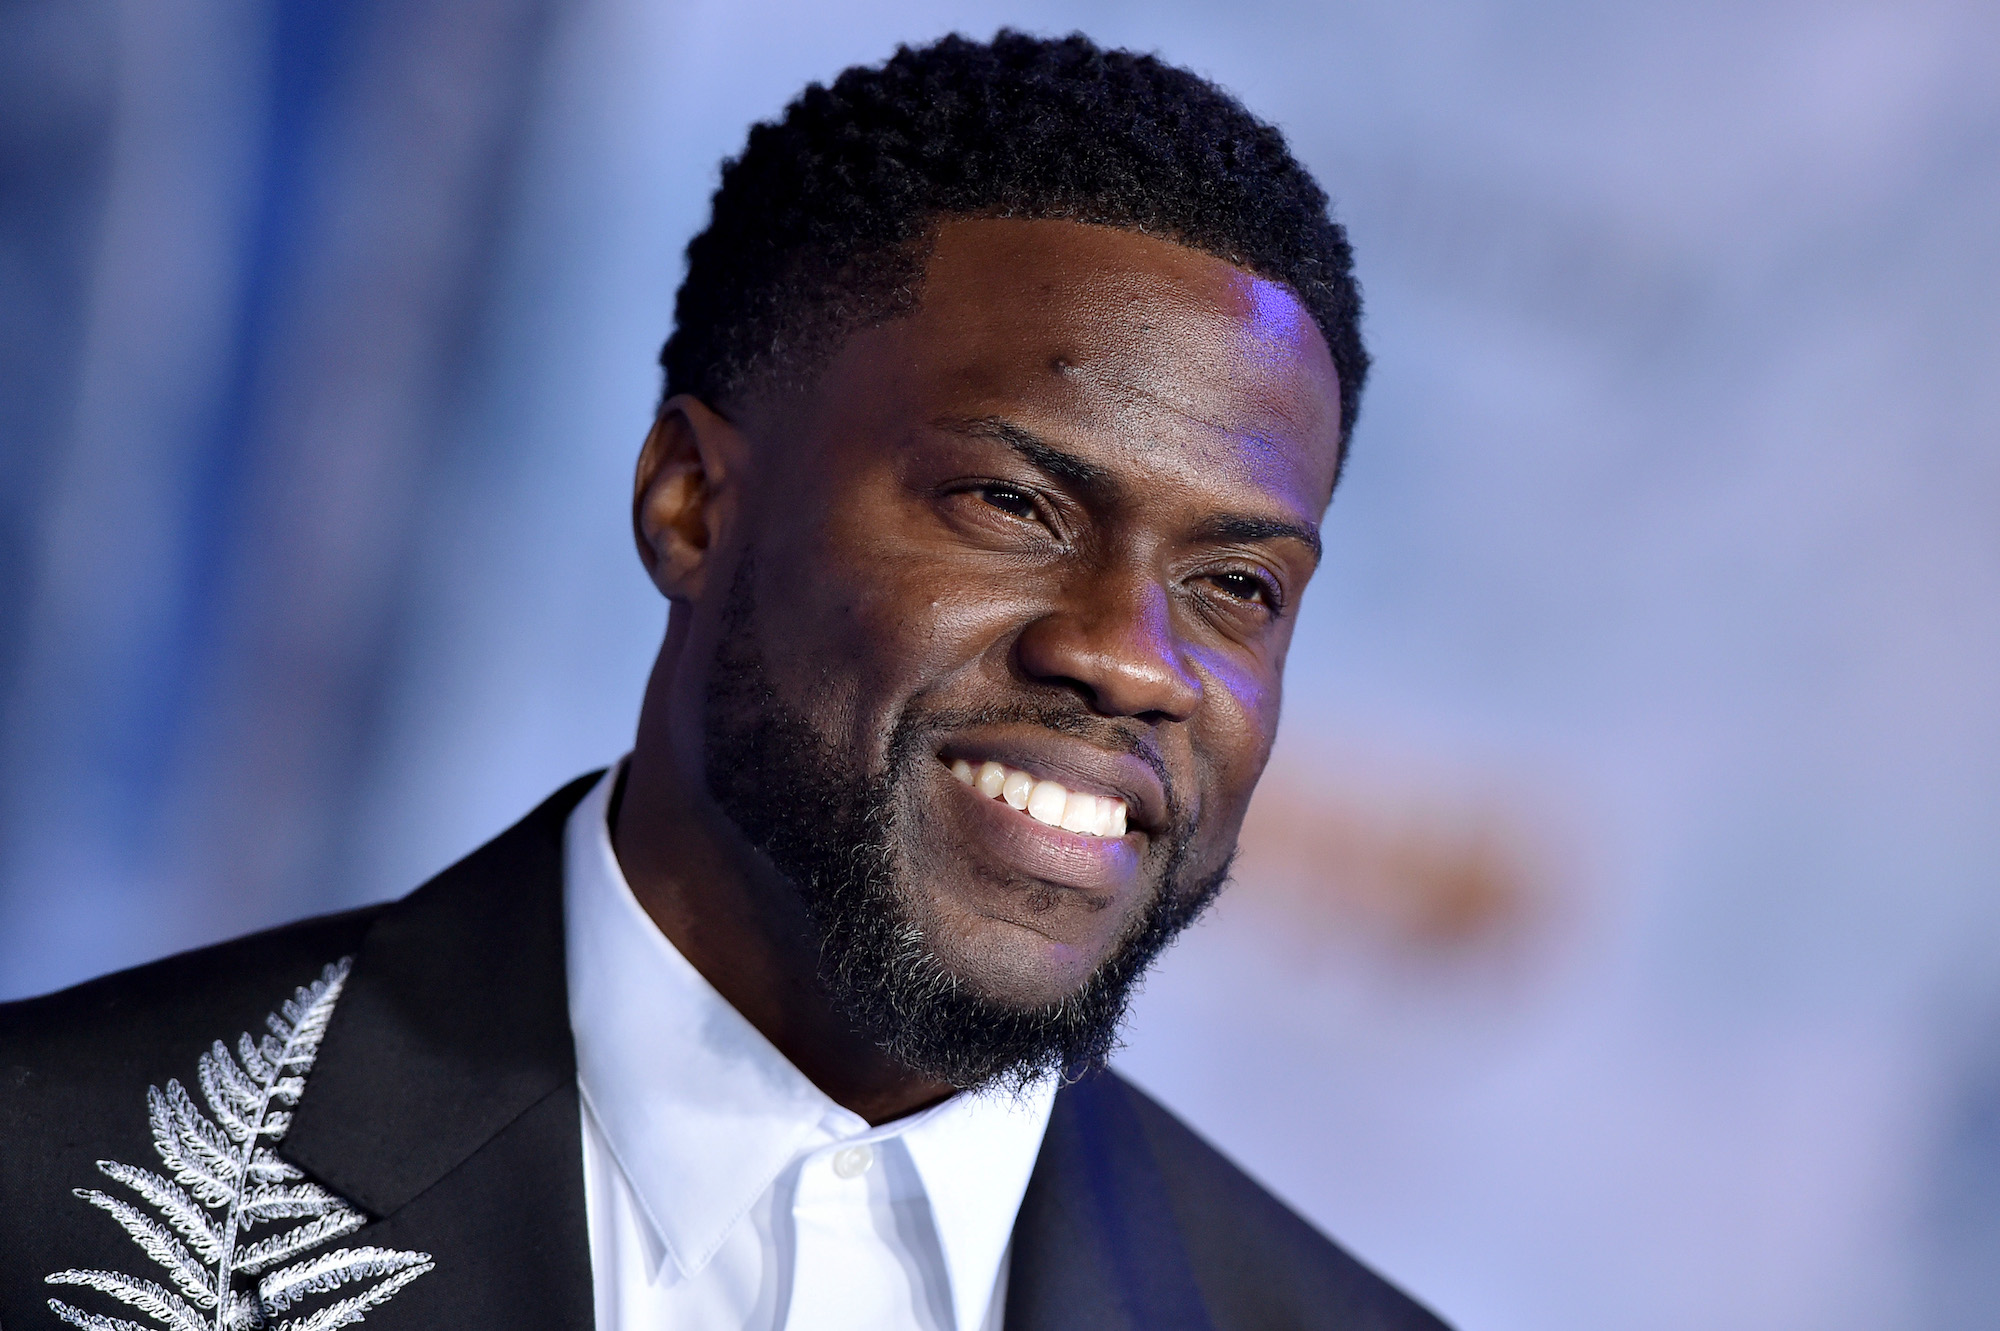 Kevin Hart attends the premiere of 'Jumanji: The Next Level' on December 9, 2019, in Hollywood, California